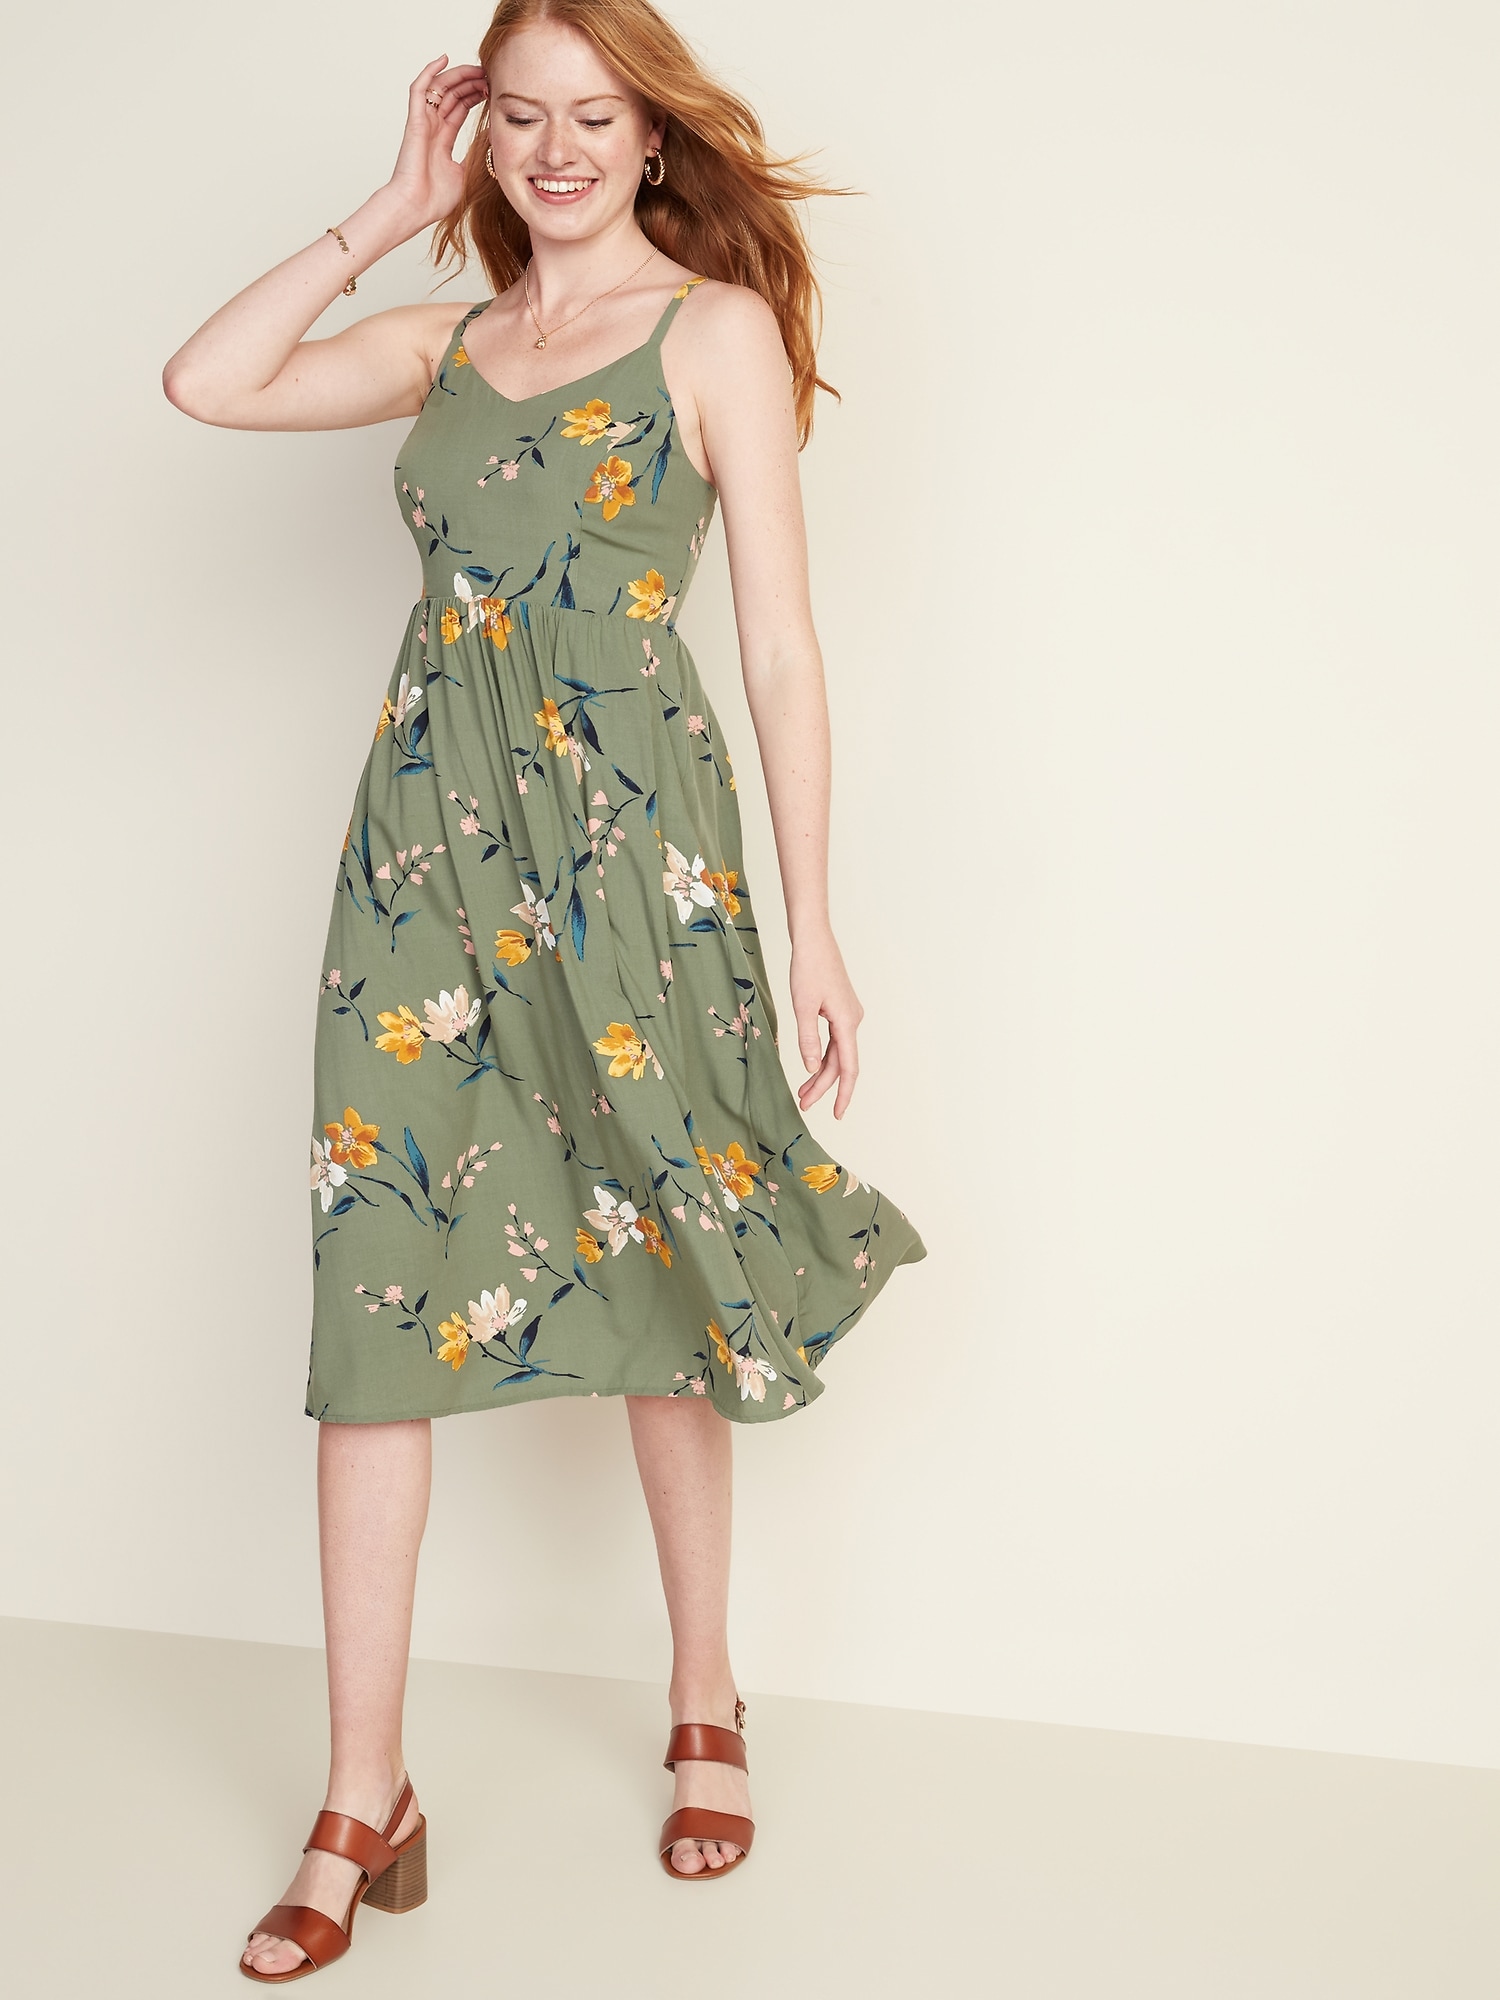 yellow floral dress old navy